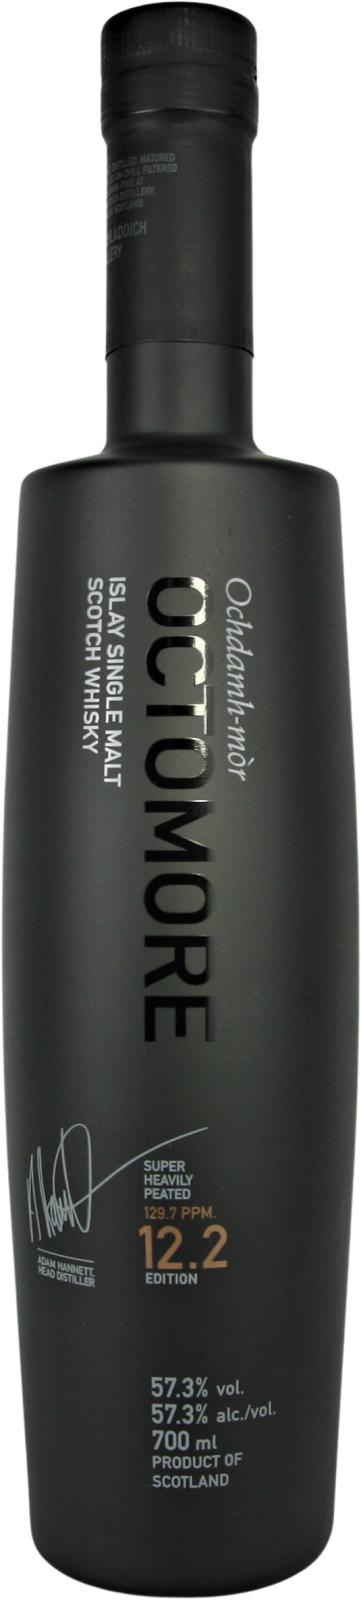 Octomore Edition 12.2 &#x2F; 129.7 PPM